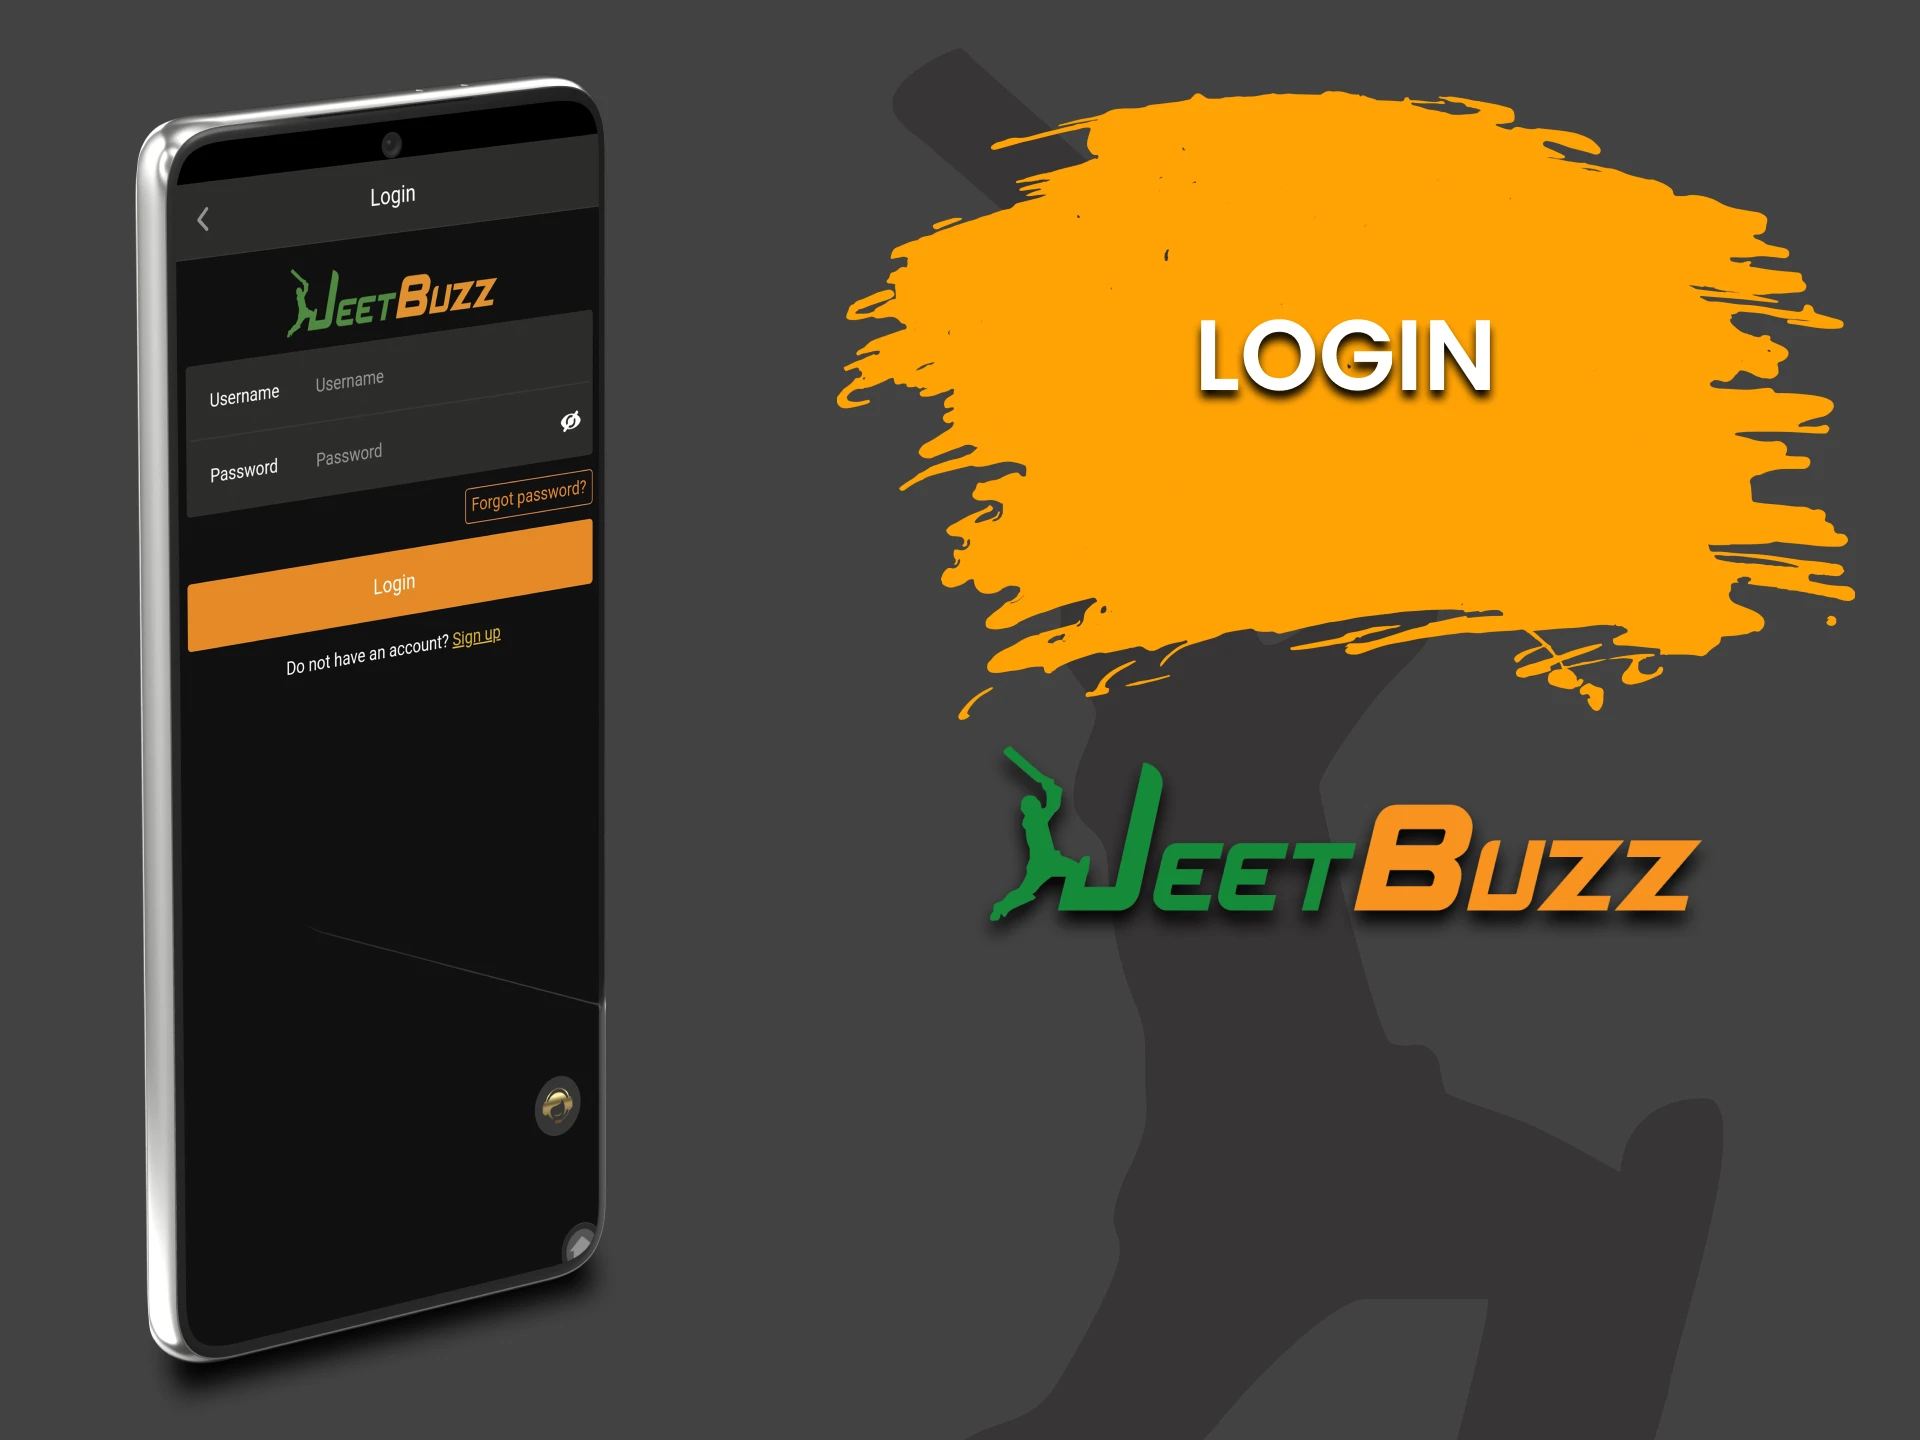 Sign in to your personal account in the JeetBuzz app.